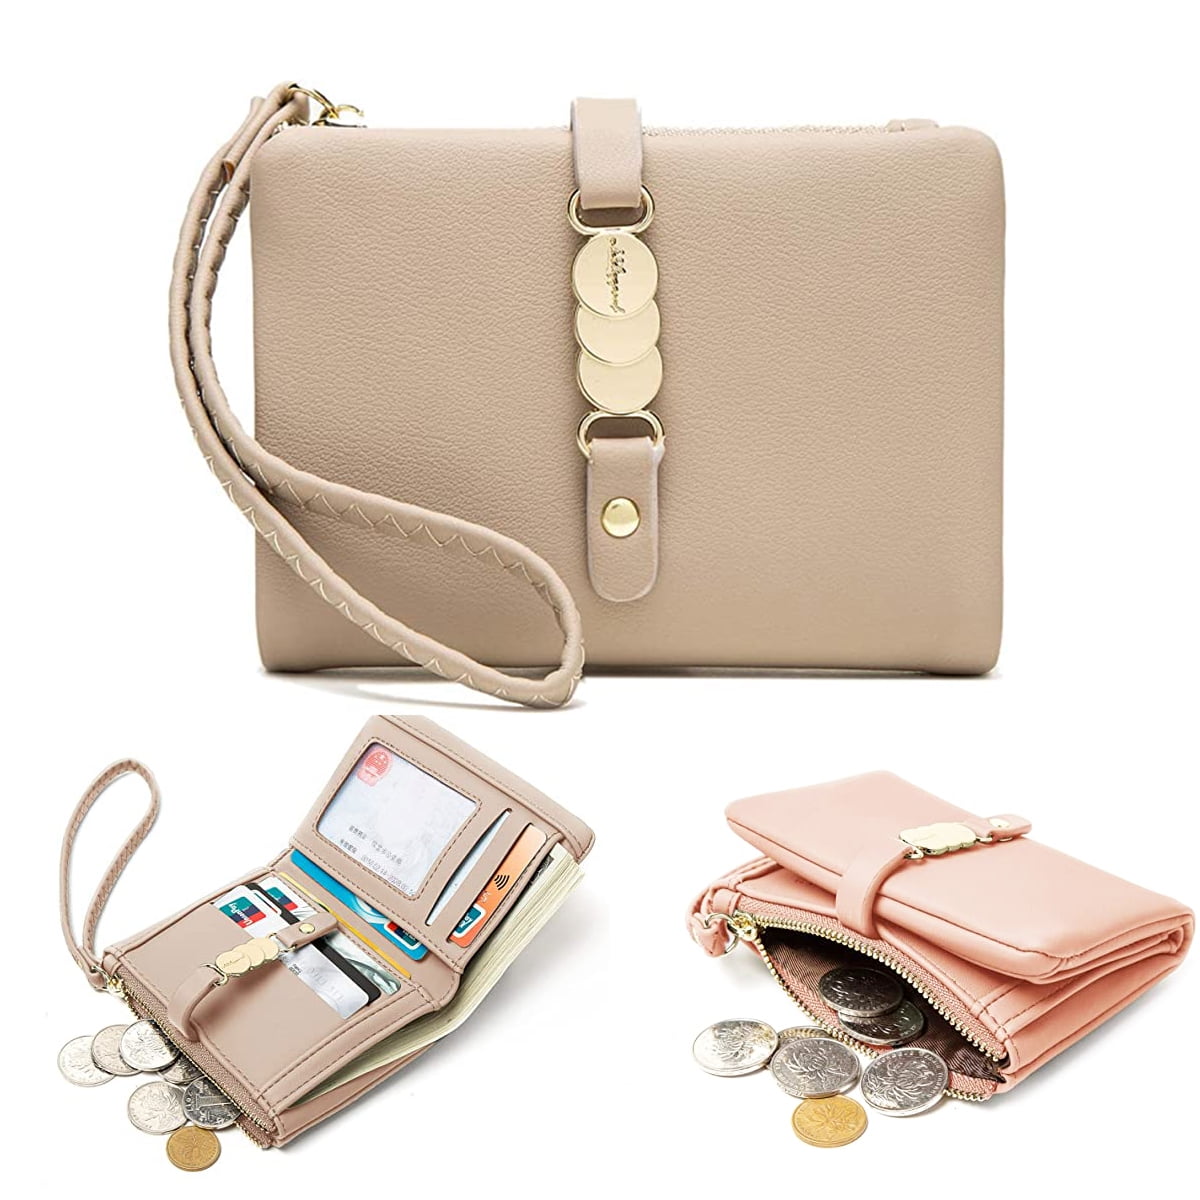 Womens Wallets Small Wristlet,Ladies Wallets for Card Coin,Change Purse  with Wrist Strap-Apricot 